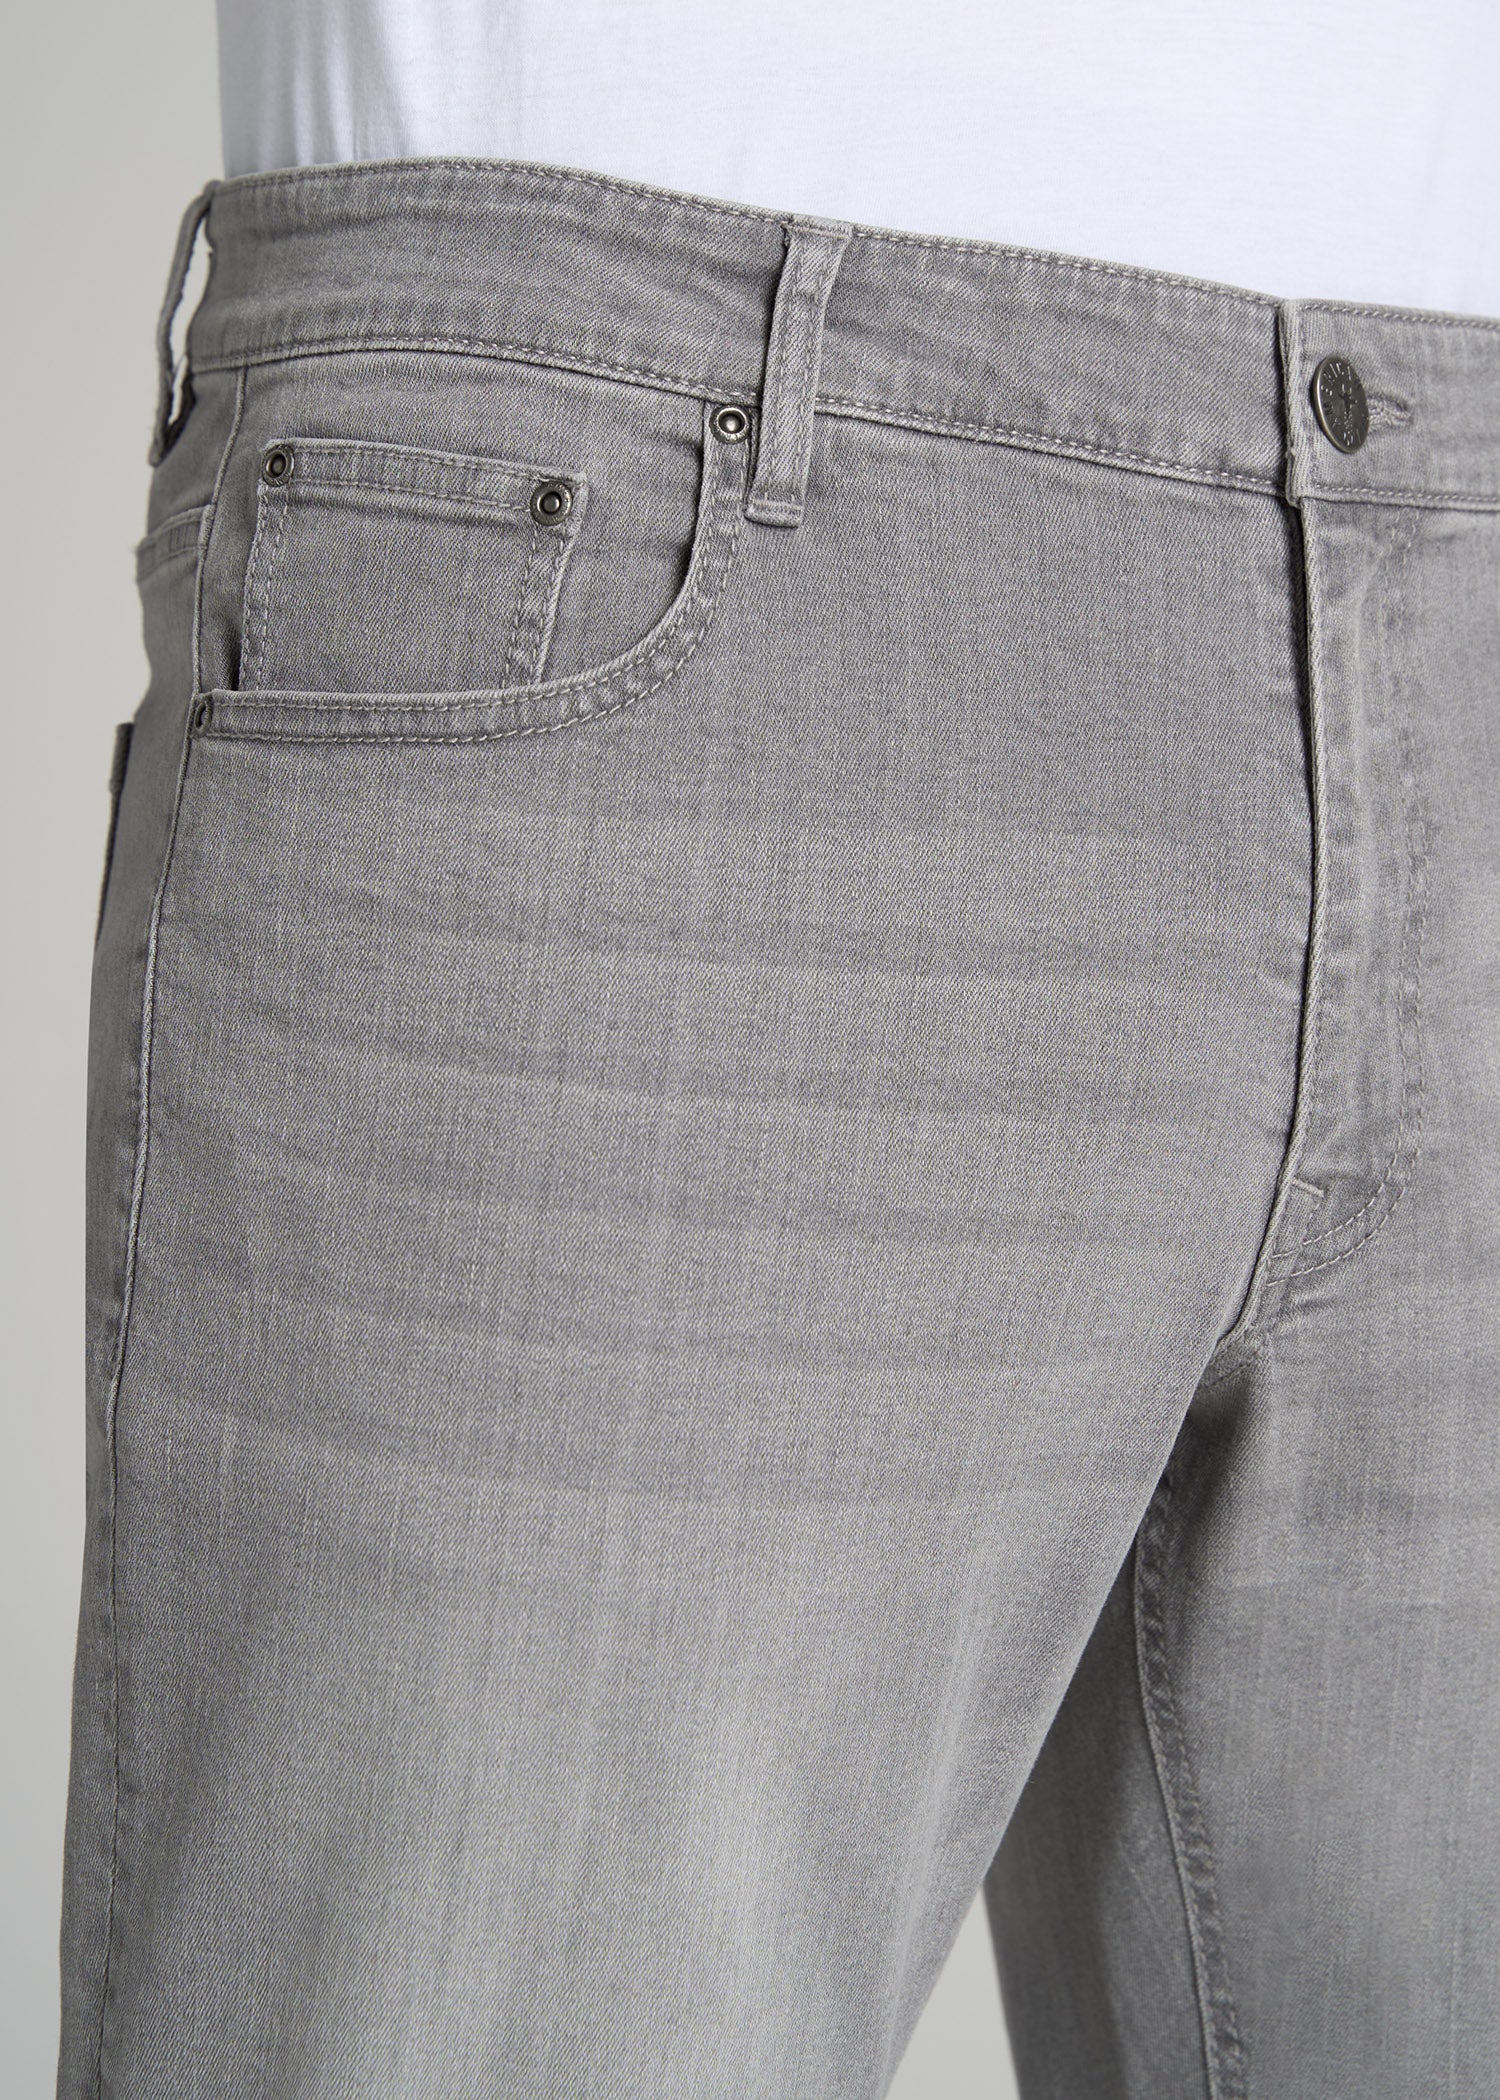 Concrete Grey Jeans For Tall Men | Carman Tapered | American Tall